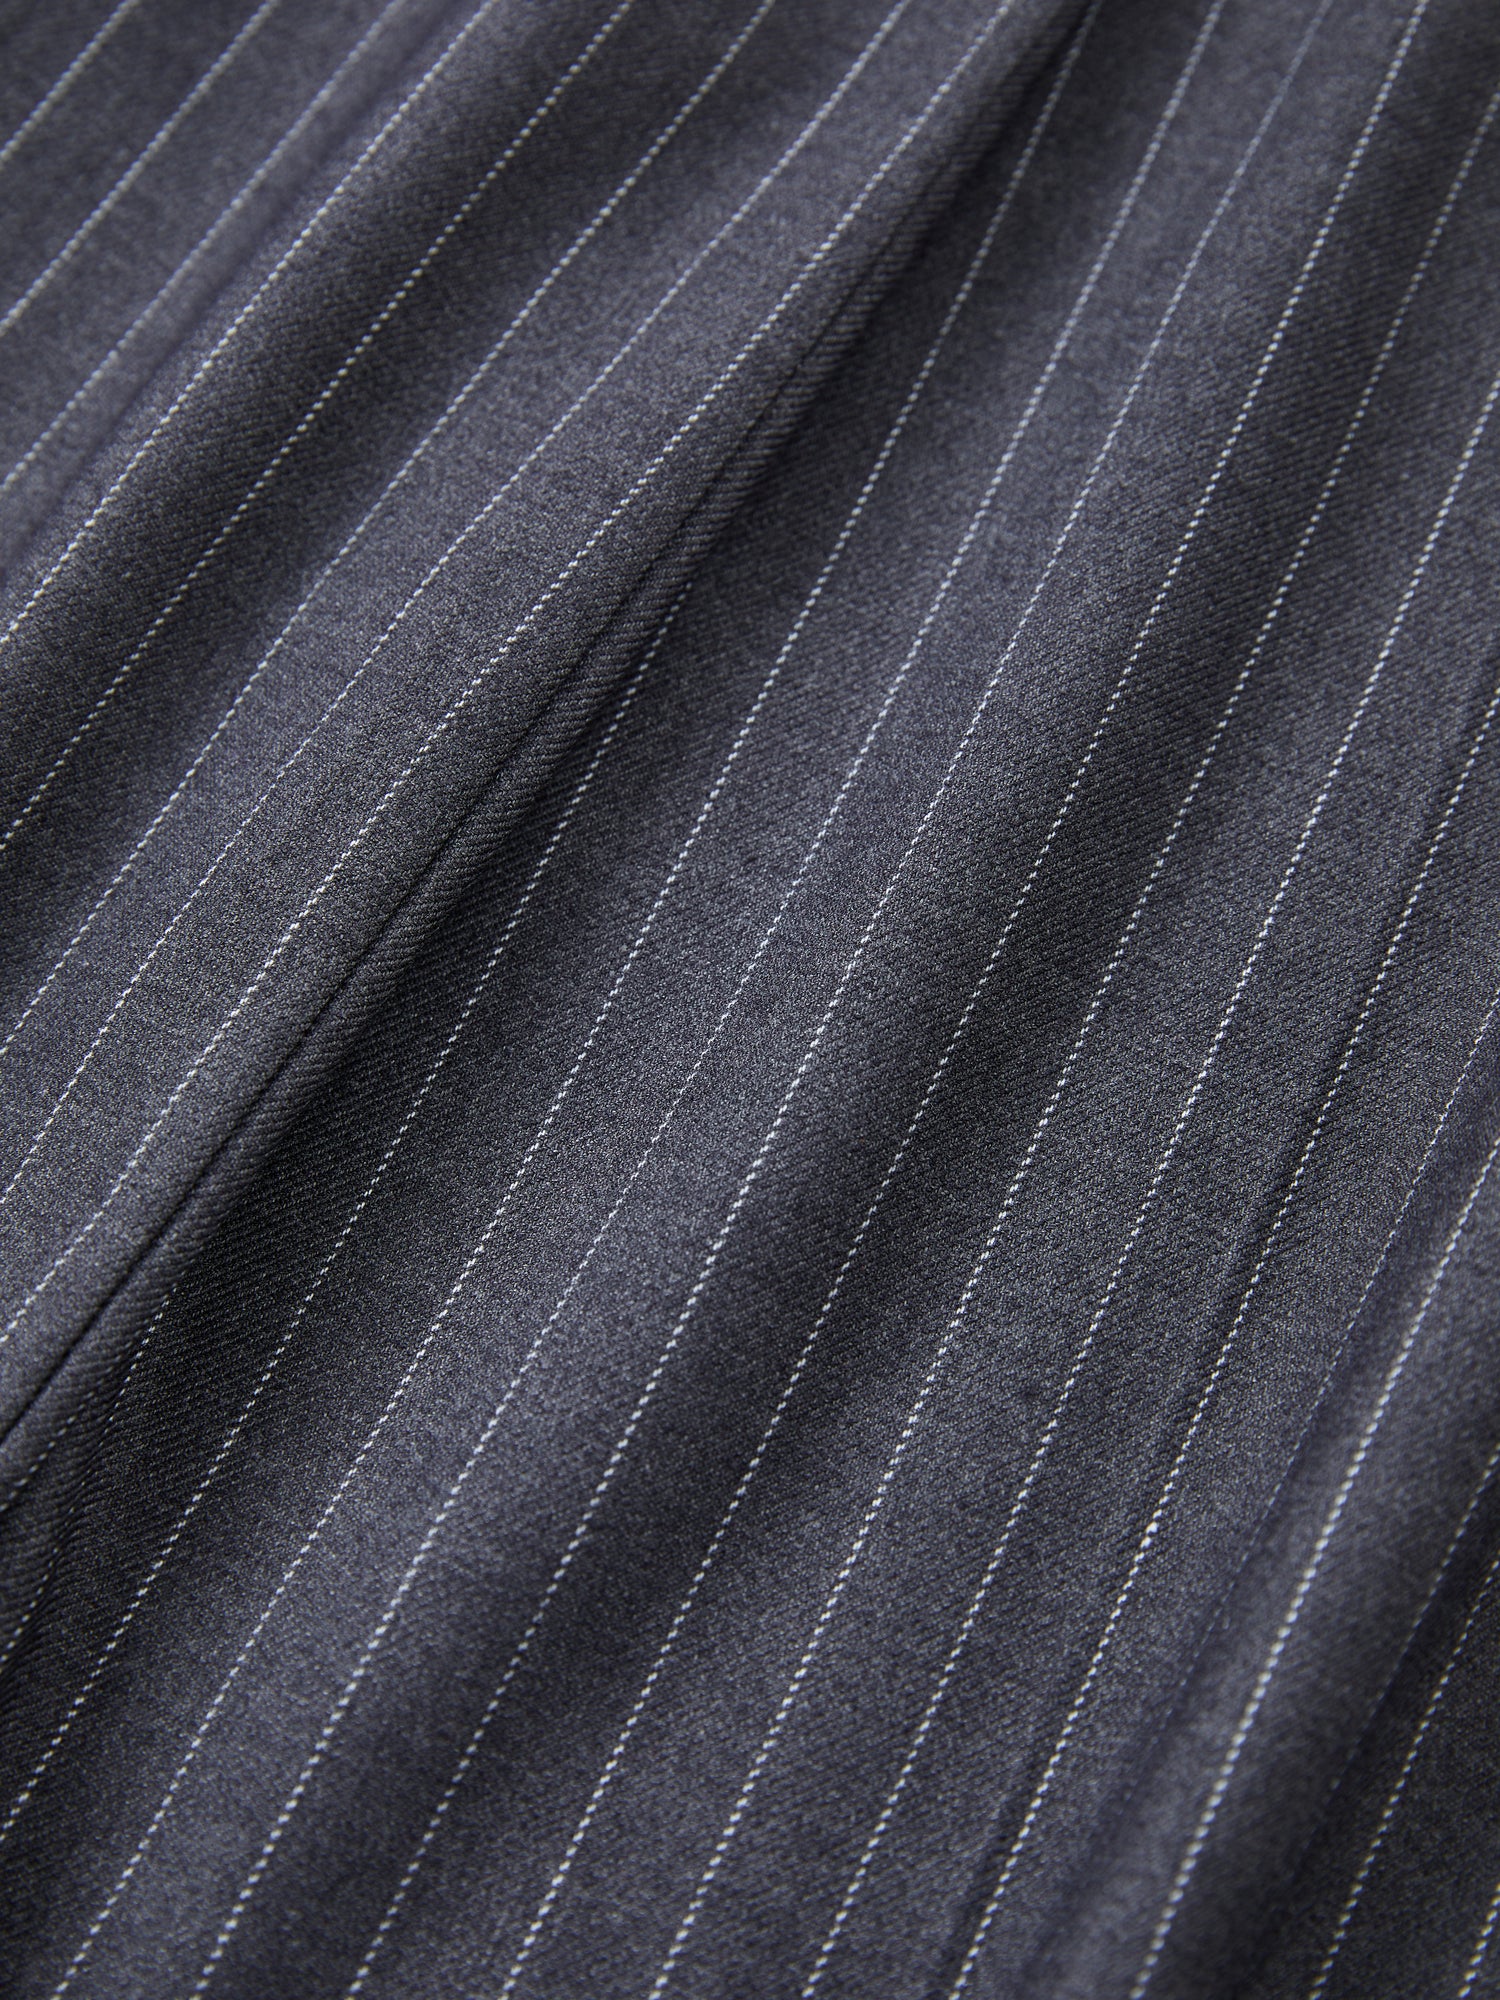 A close up of Found Pinstripe Pleated Trousers fabric.